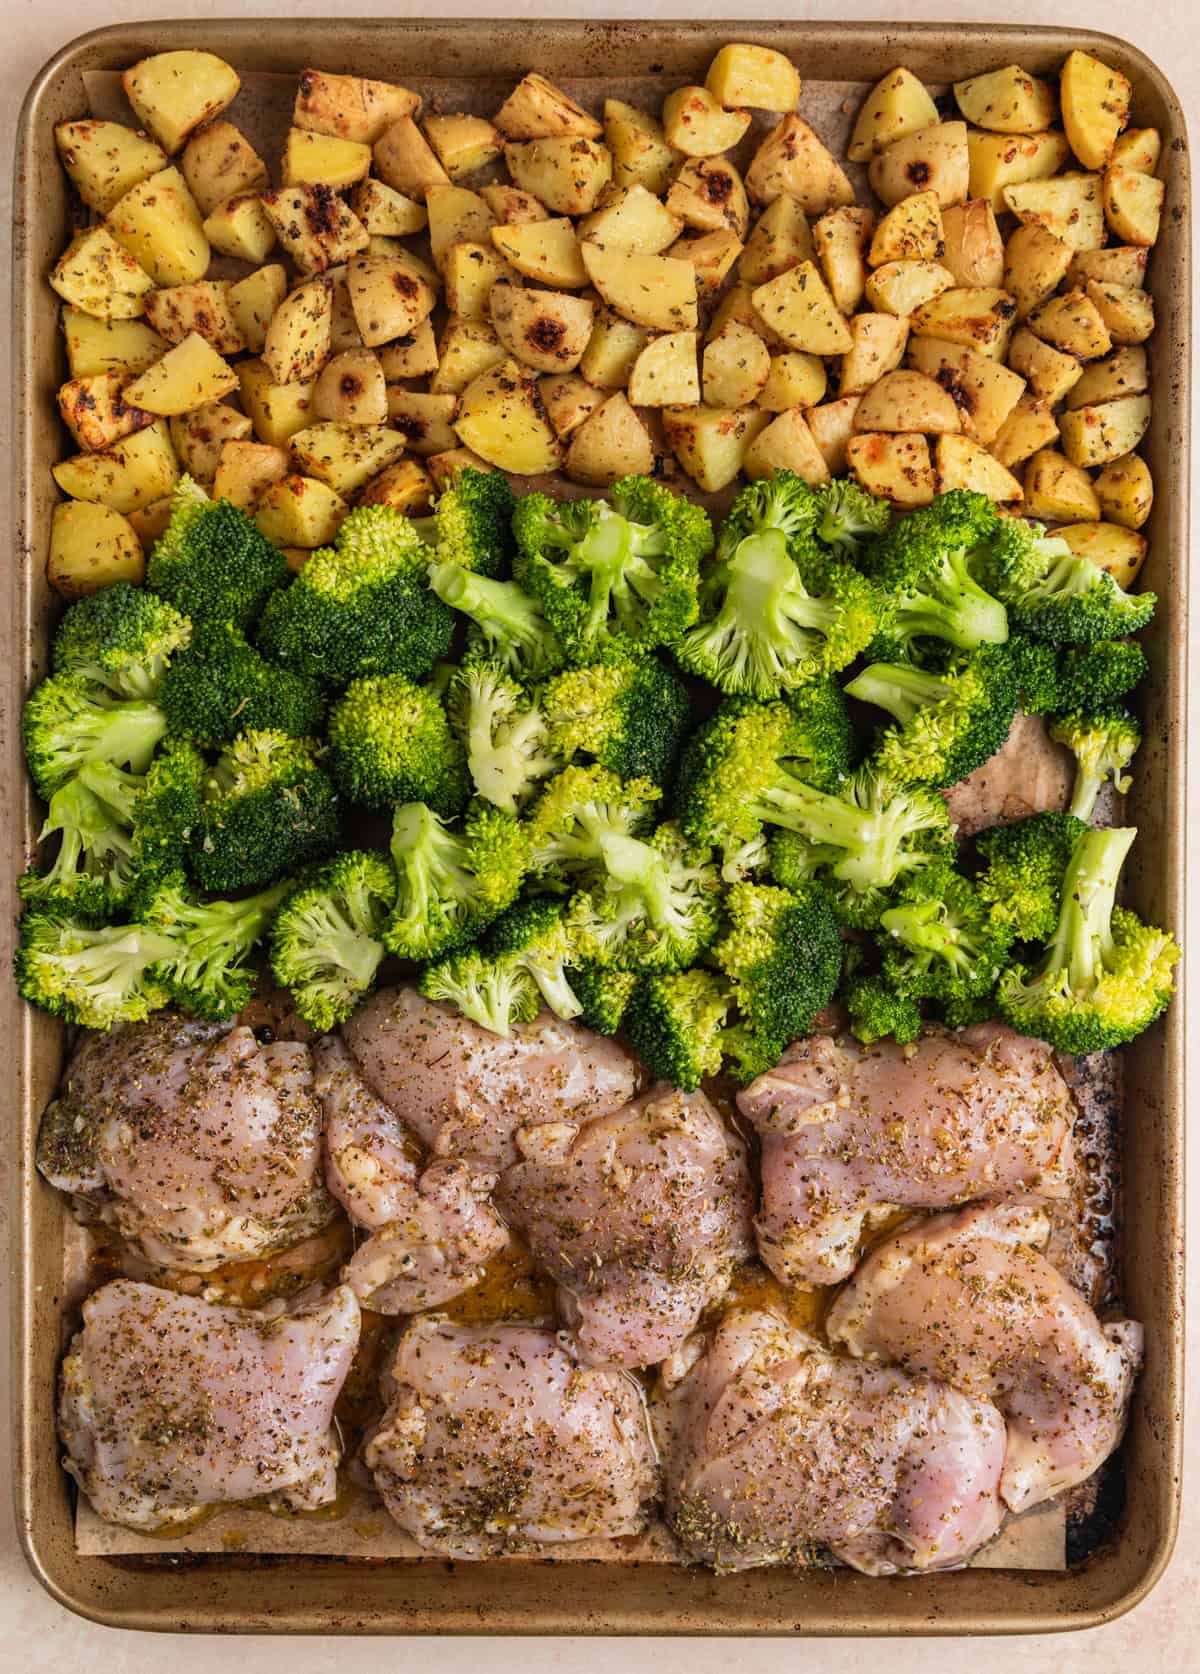 Uncooked chicken thighs and broccoli added to sheet pan with potatoes already partially roasted.